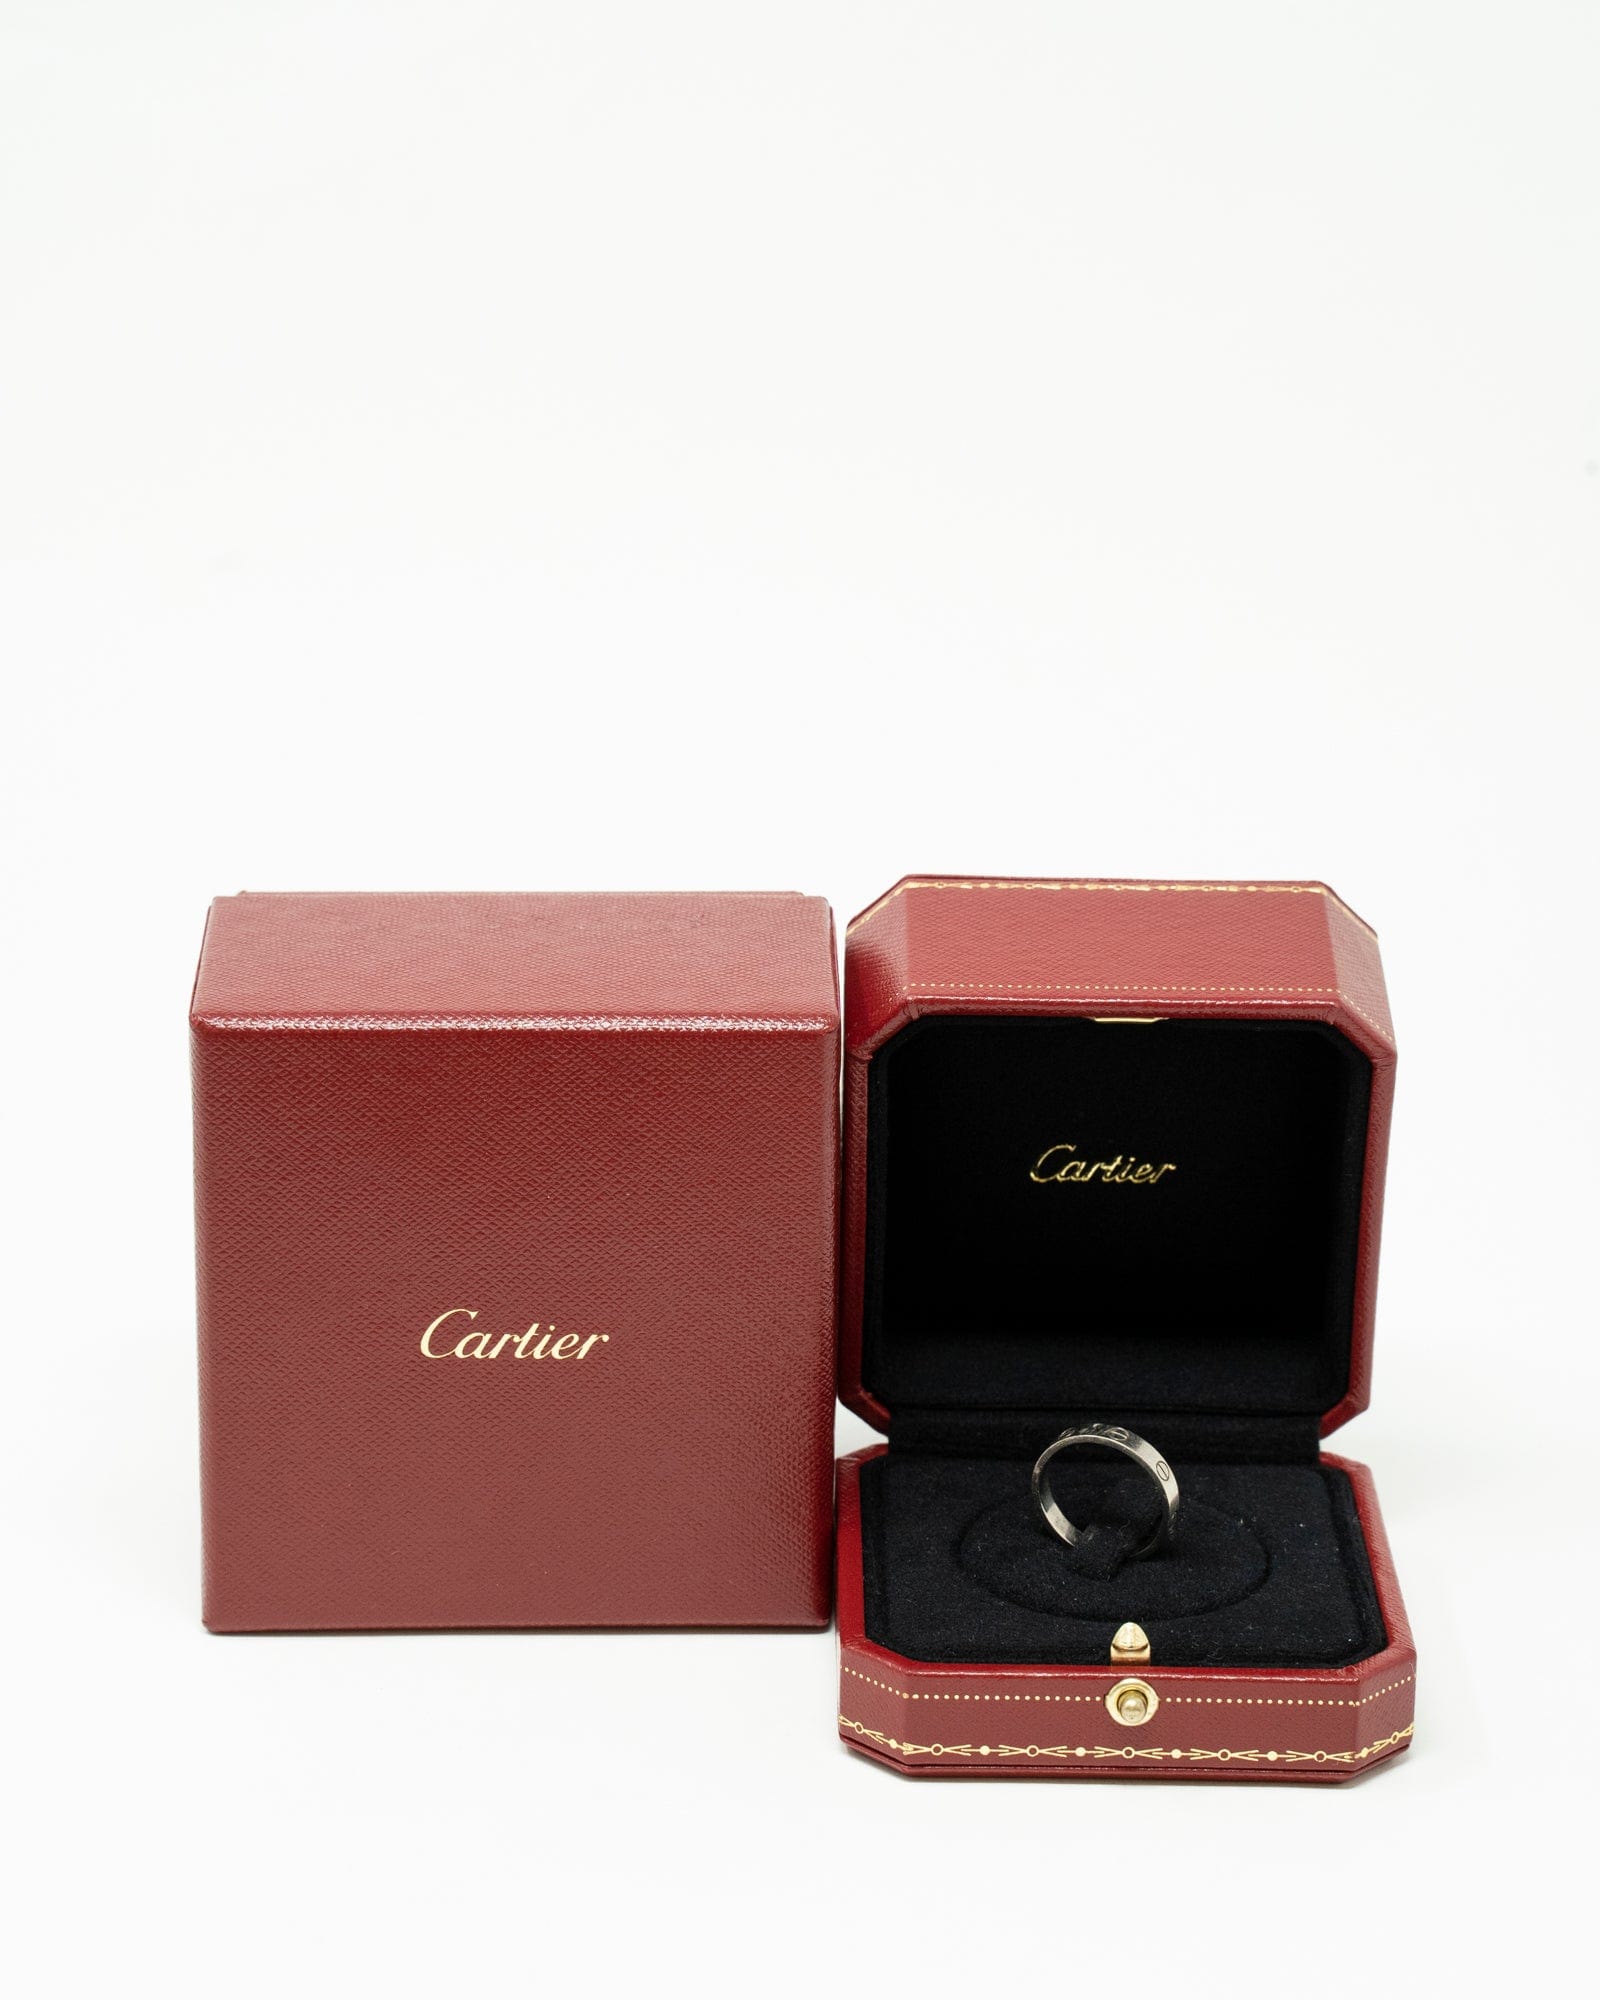 Cartier Cartier love ring - silver (white gold) - AJC0003